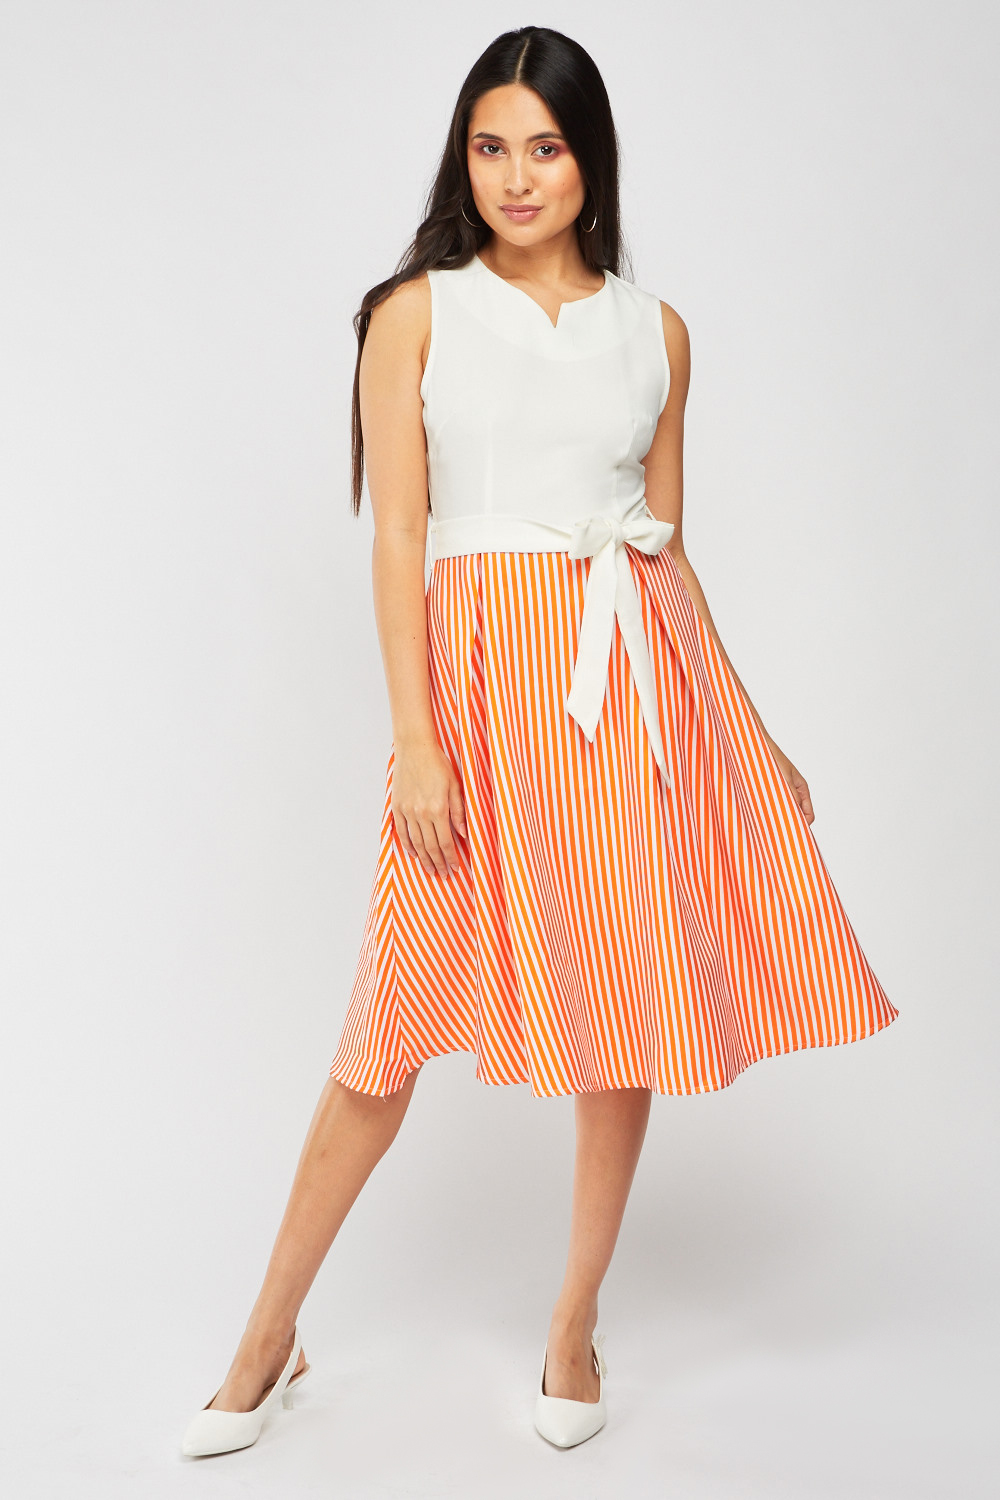 Box Pleated Contrasted Bodice Dress - Just $6